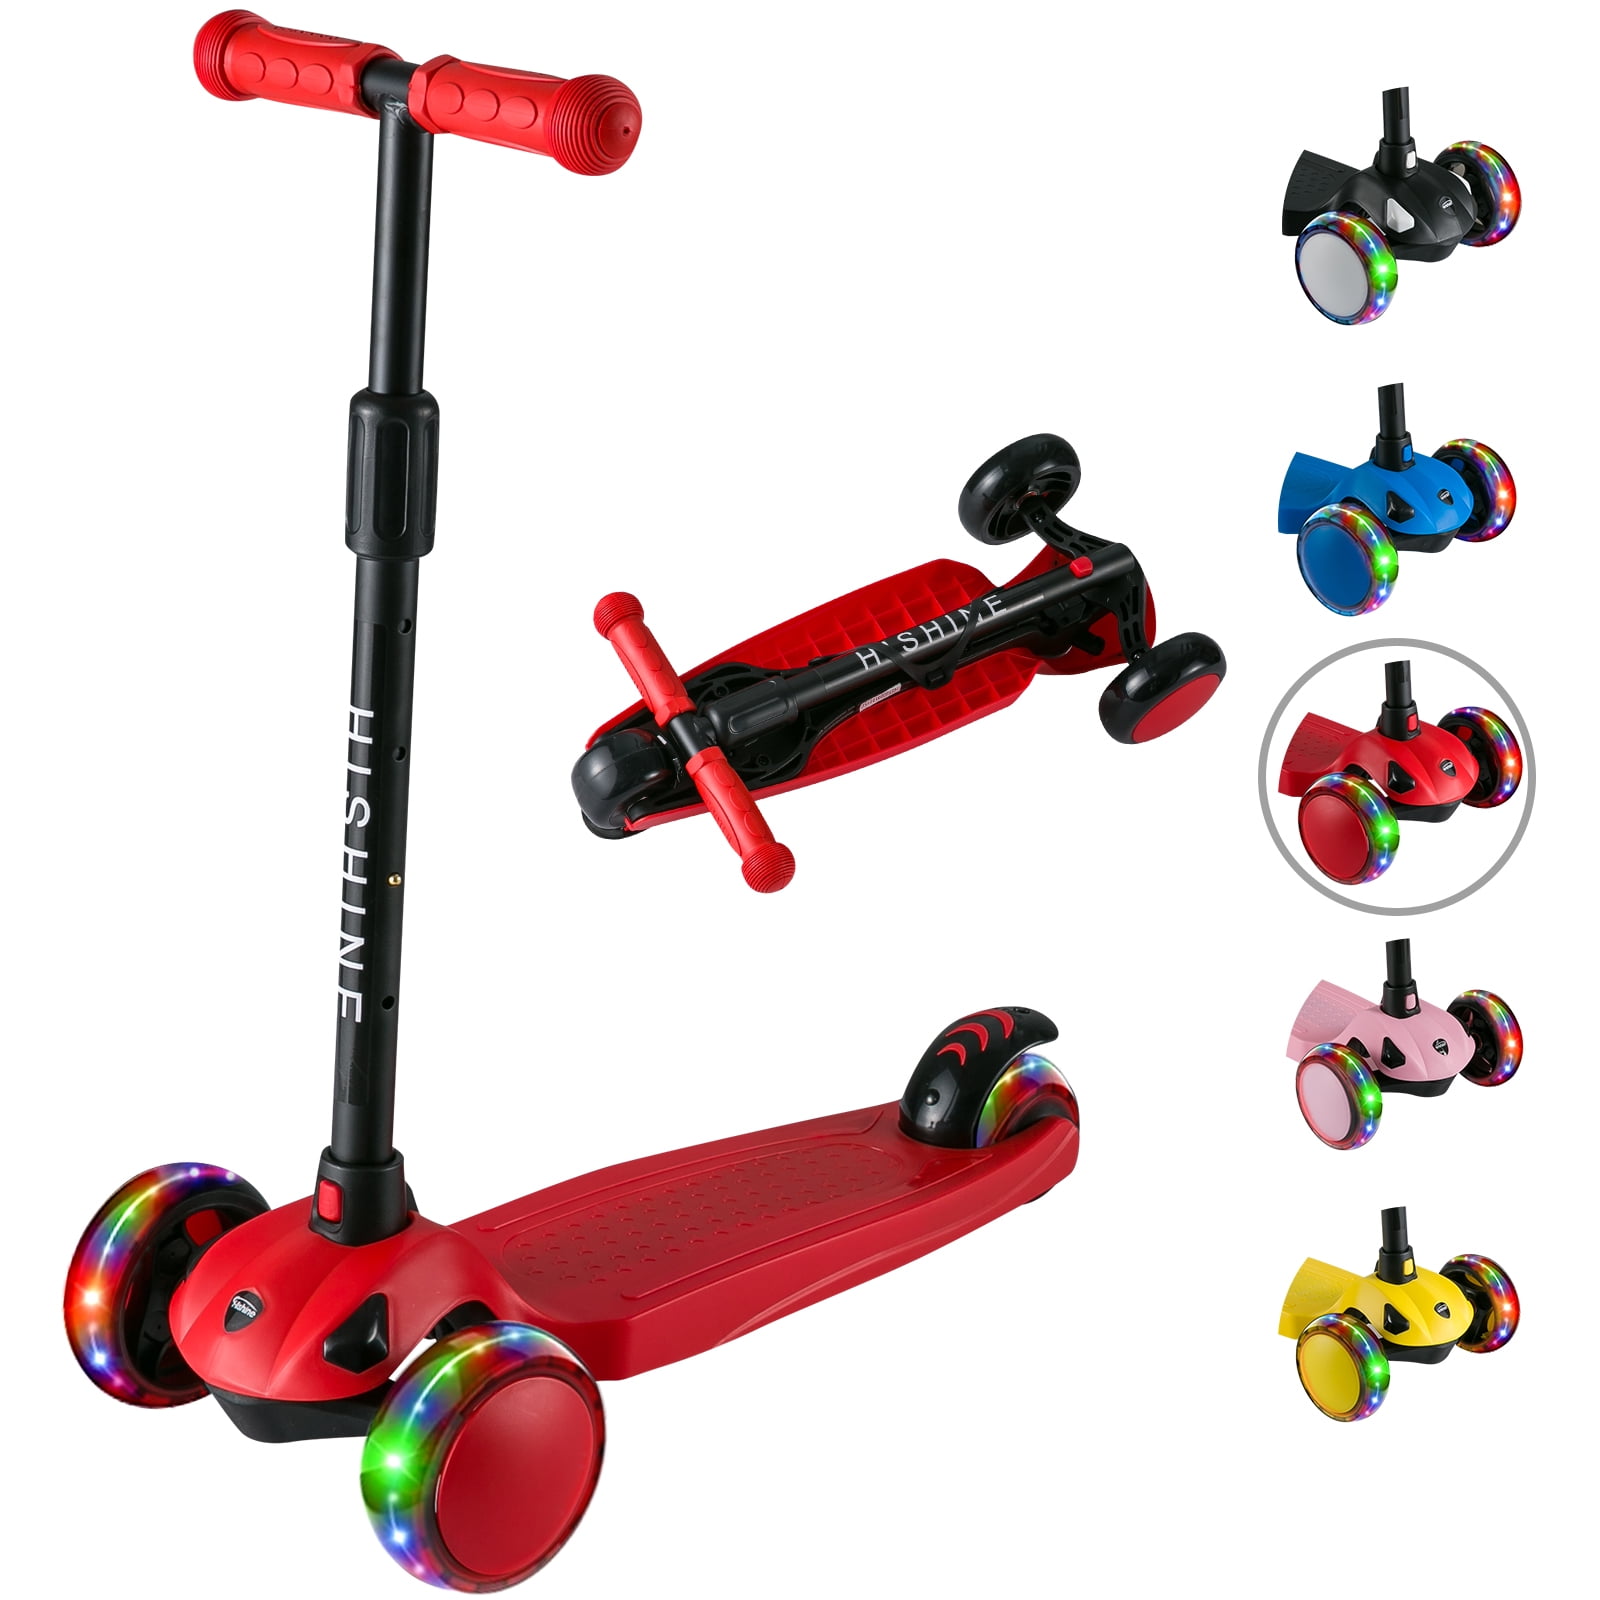 VOKUL Kick Scooter for Kids 3 Wheel Scooter for Toddlers Girls & Boys Lean to Steer with LED Light Up Wheels for Children from 3 to 12 Years Old 4 Adjustable Height